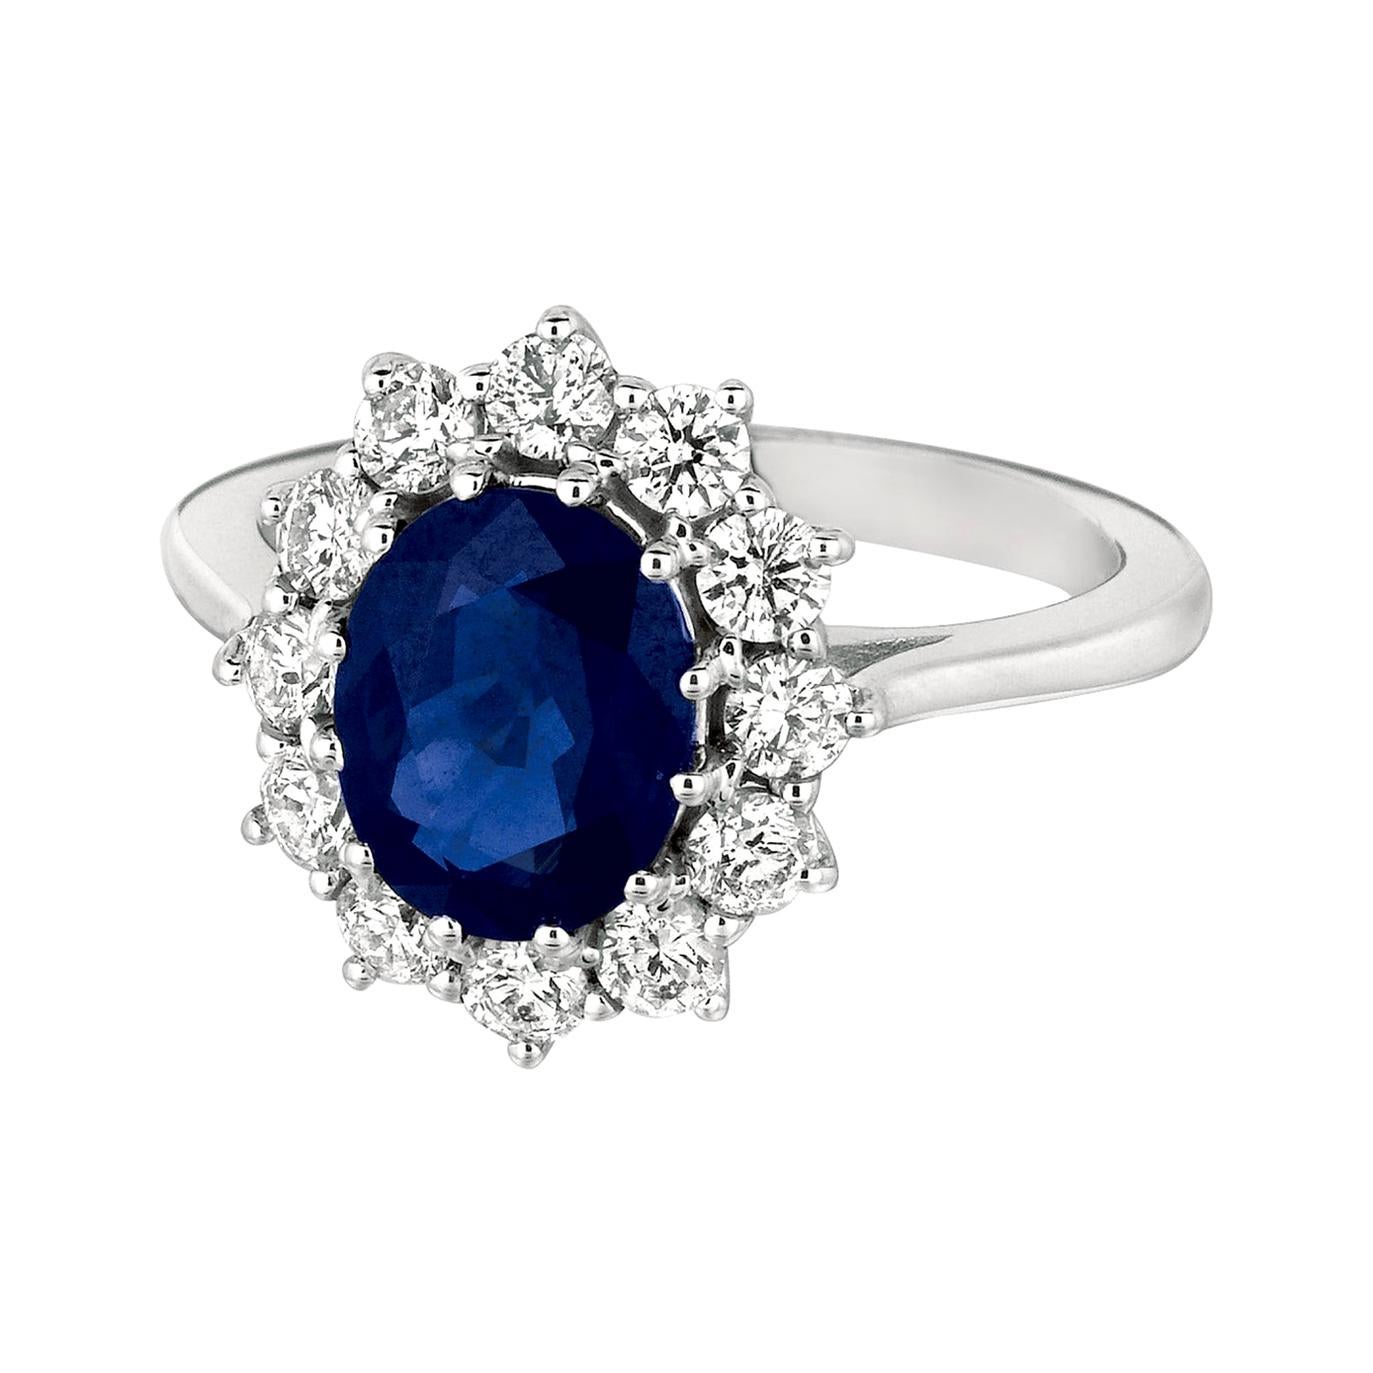 Princess Diana Inspired 3.55 Carat Oval Sapphire and Diamond Ring 14k White Gold